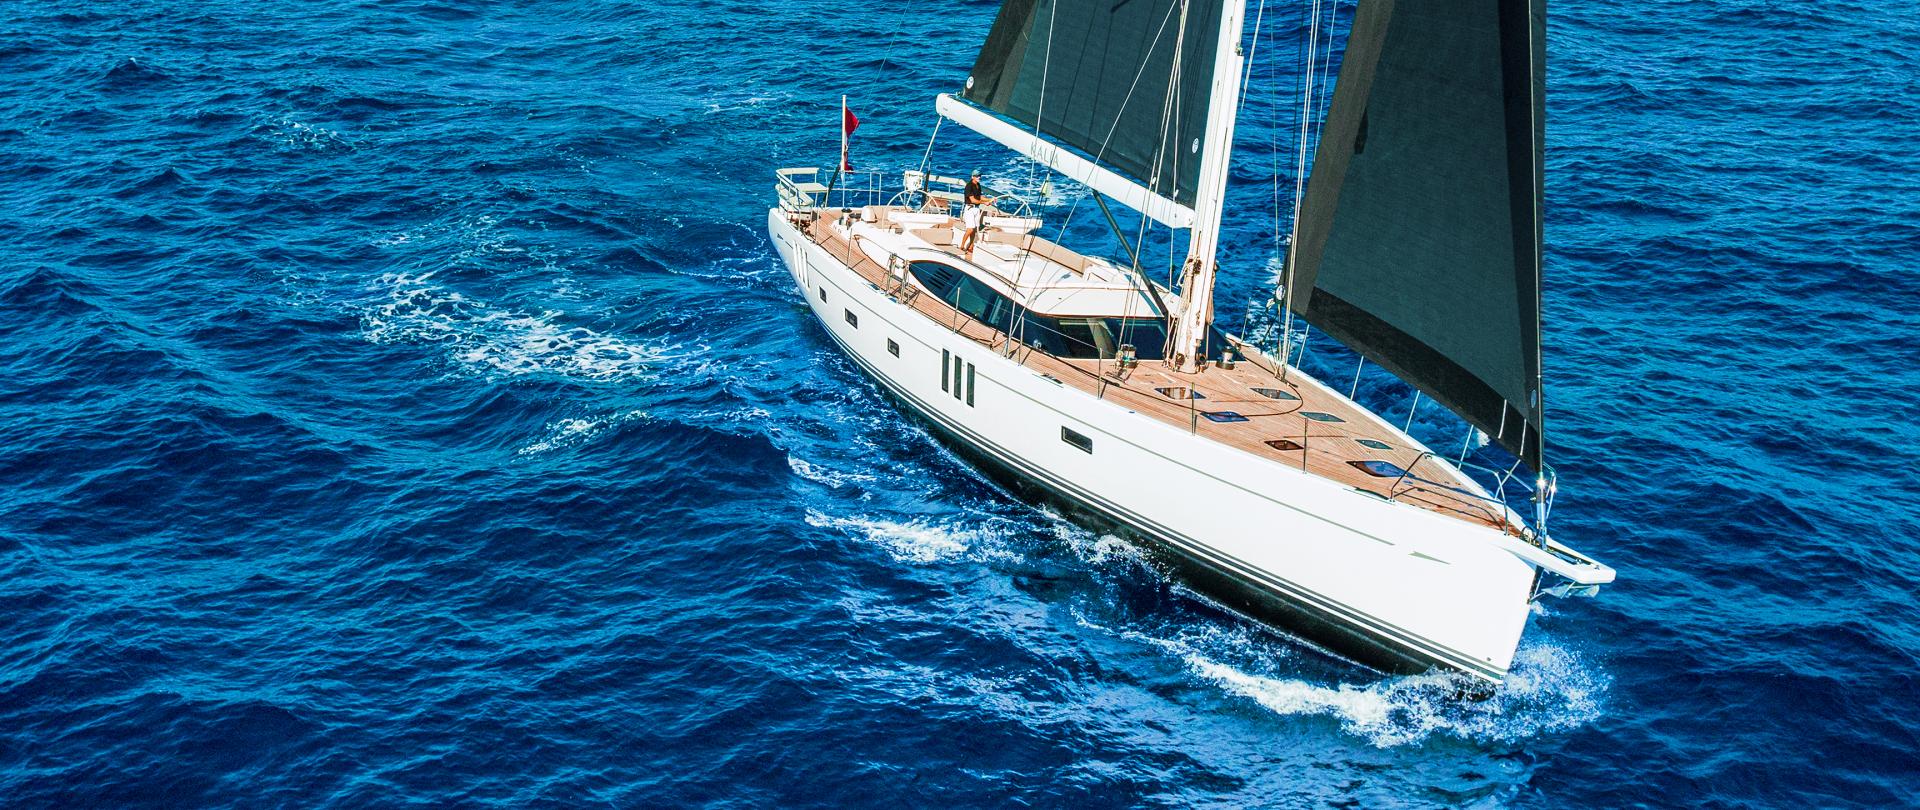 75 Foot Yacht | Oyster 745 | Offshore Sailboat | Oyster Yachts